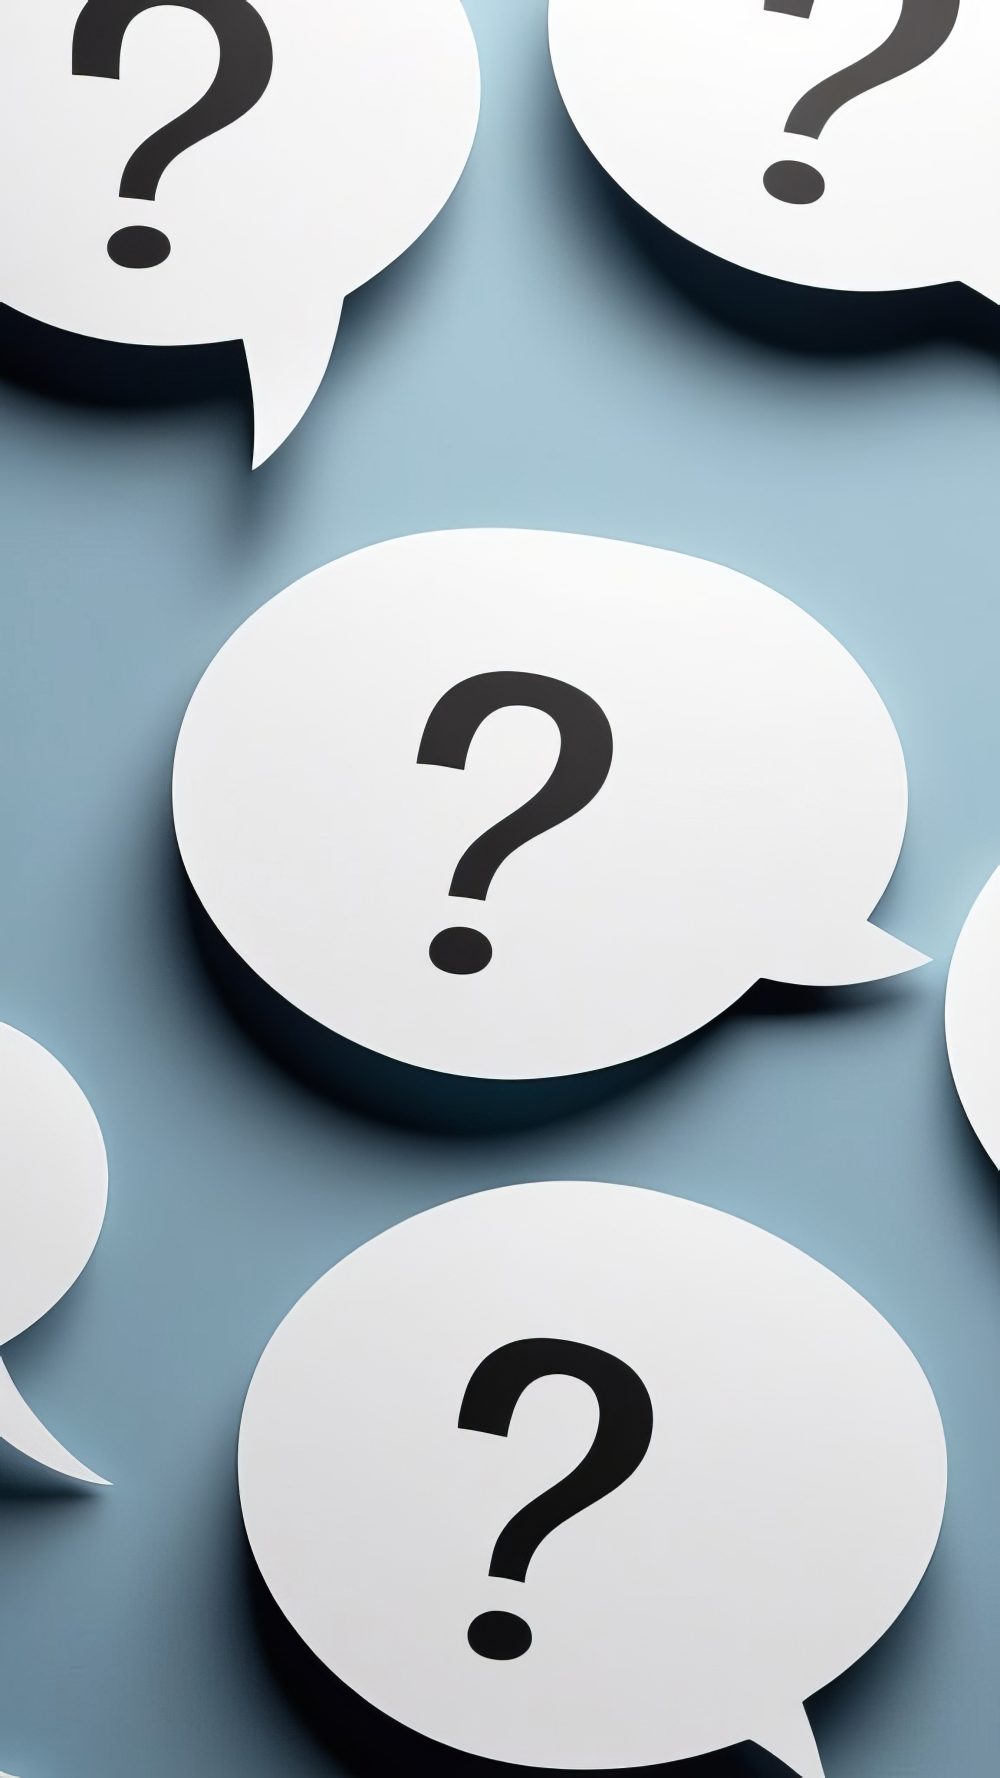 stock image with black question marks inside white comment bubbles over a blue background